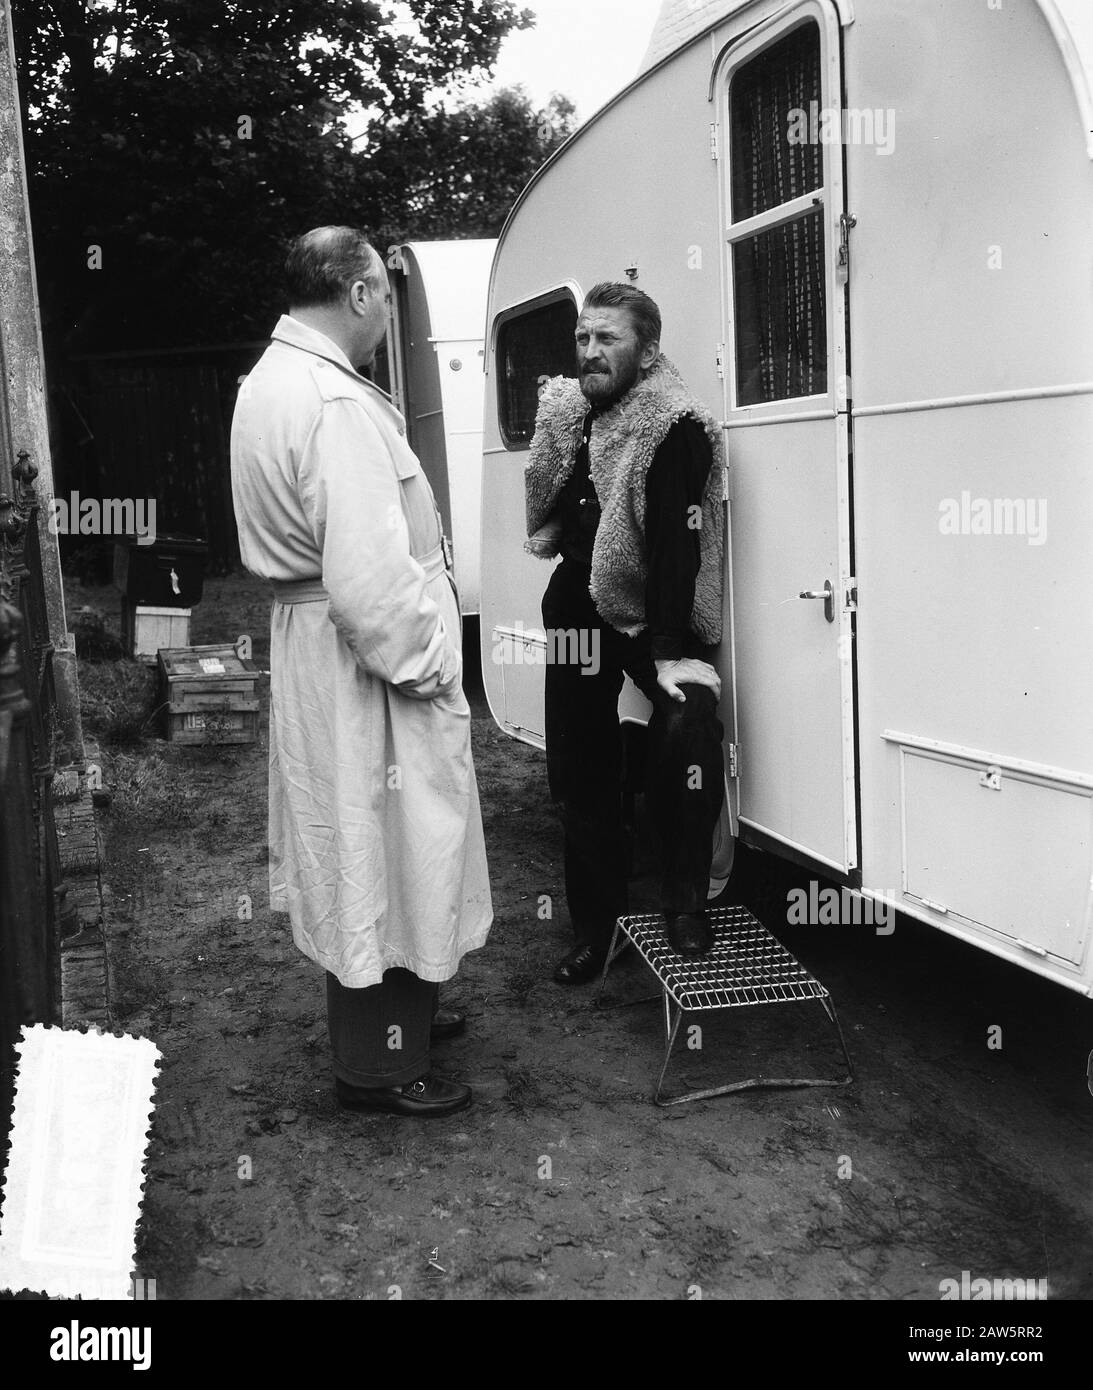 Nuenen. shooting of the film Lust for Life, Vincent van Gogh, with Kirk Douglas Date: September 12, 1955 Location: Noord-Brabant, Nuenen Keywords: actors, movies, movie stars Person Name: Douglas, Kirk Stock Photo